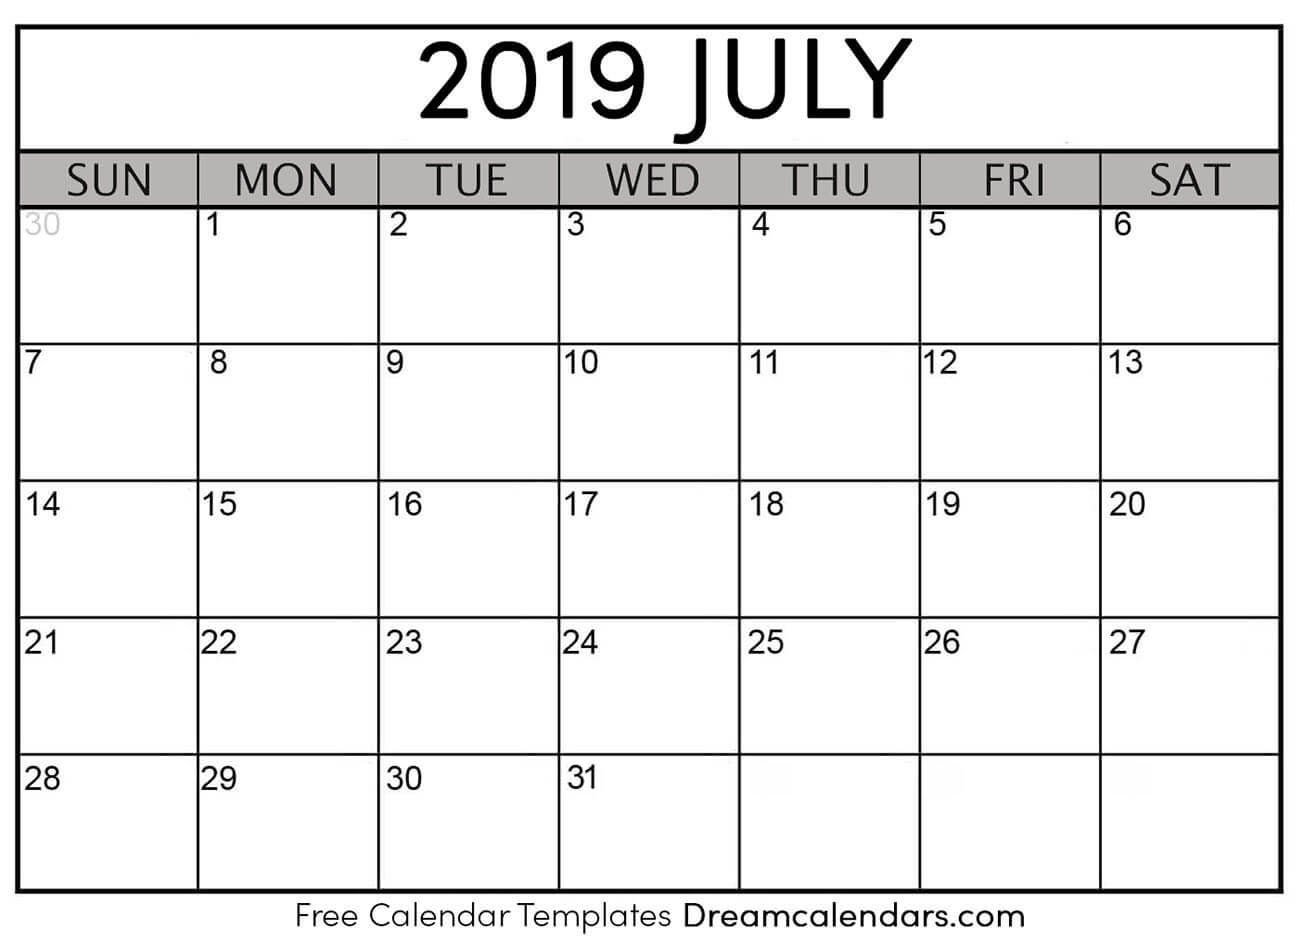 July 2019 Calendar Free Printable with Holidays and Observances